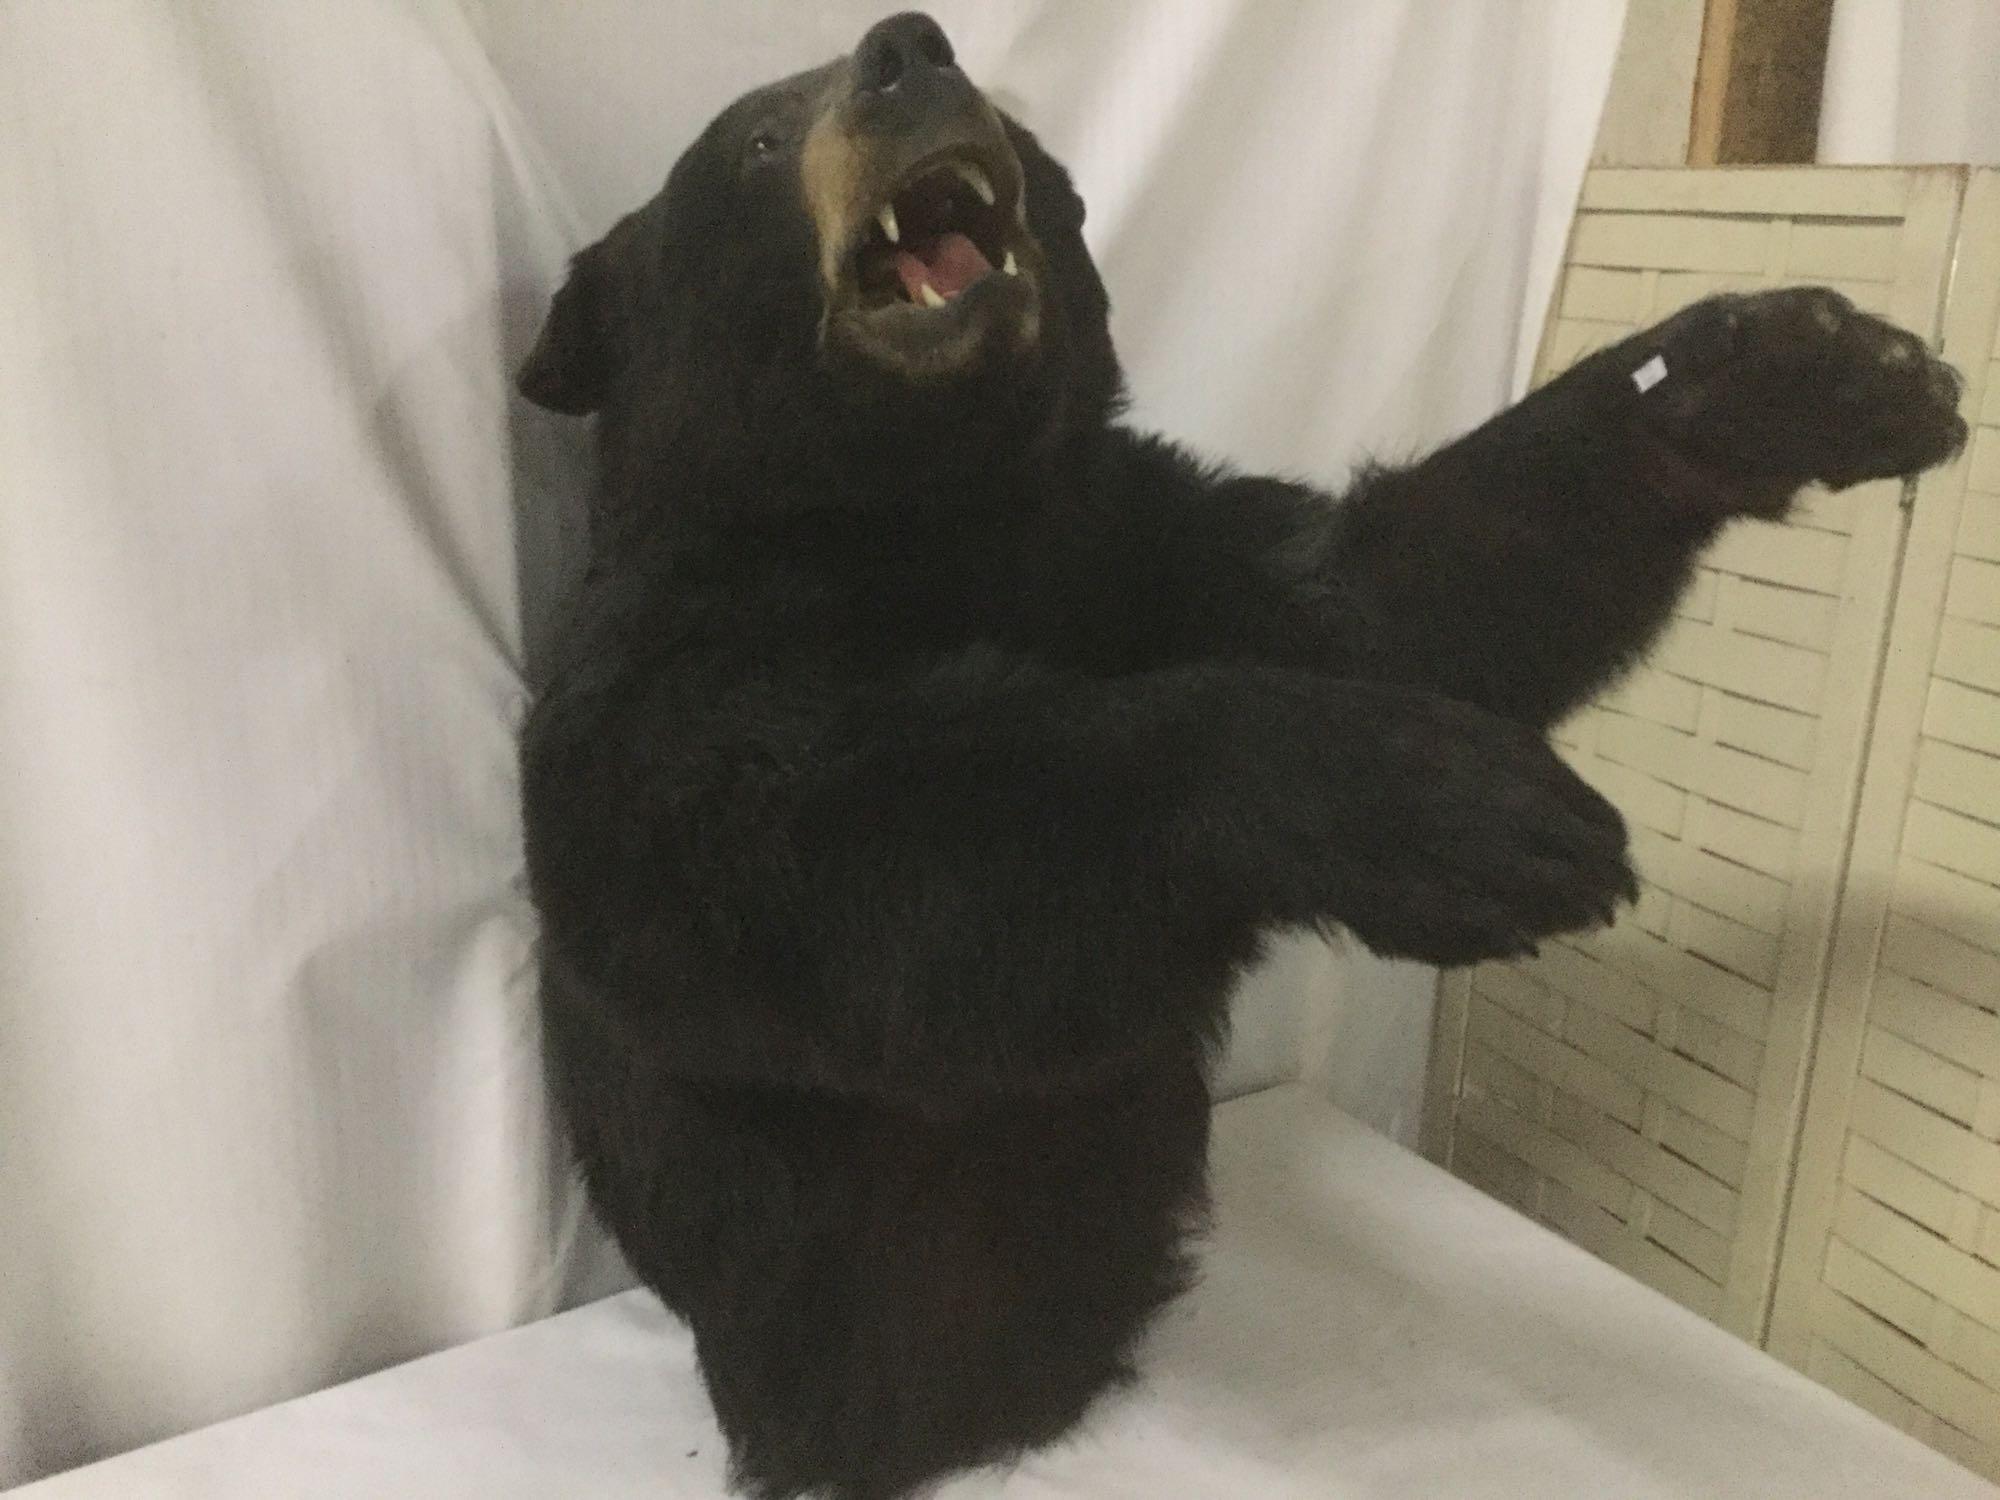 Wall hanging taxidermy black bear torso and head in attack position - full mount ready to hang!